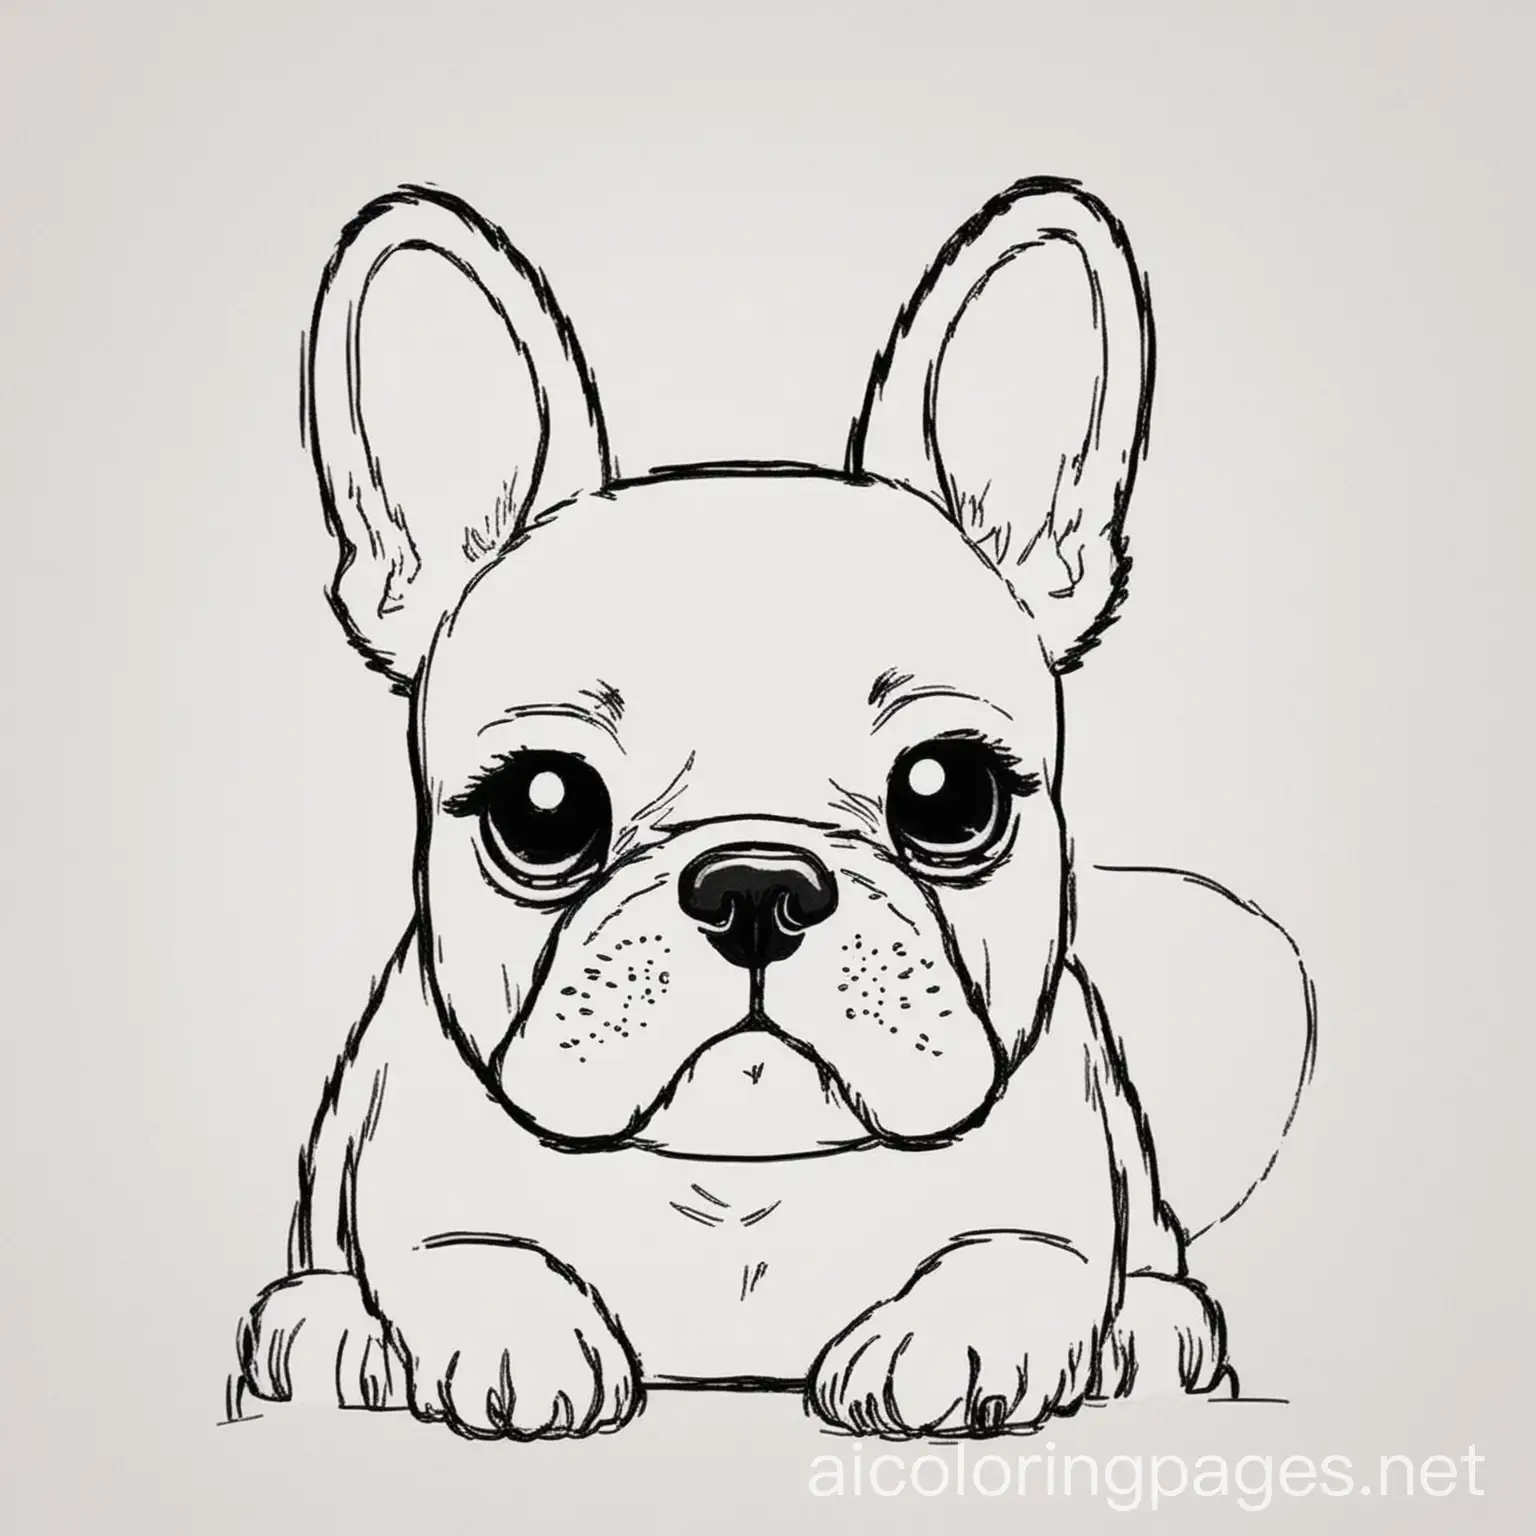 Coloring page for children,simple coloring page, just outline blacklines, no color, in the foreground a single French bulldog with a happy face. The white background with nothing, Ample White Space. The outlines of all the subjects are easy to distinguish, making it simple for kids to color without too much difficulty, Coloring Page, black and white, line art, white background, Simplicity, Ample White Space. The background of the coloring page is plain white to make it easy for young children to color within the lines. The outlines of all the subjects are easy to distinguish, making it simple for kids to color without too much difficulty